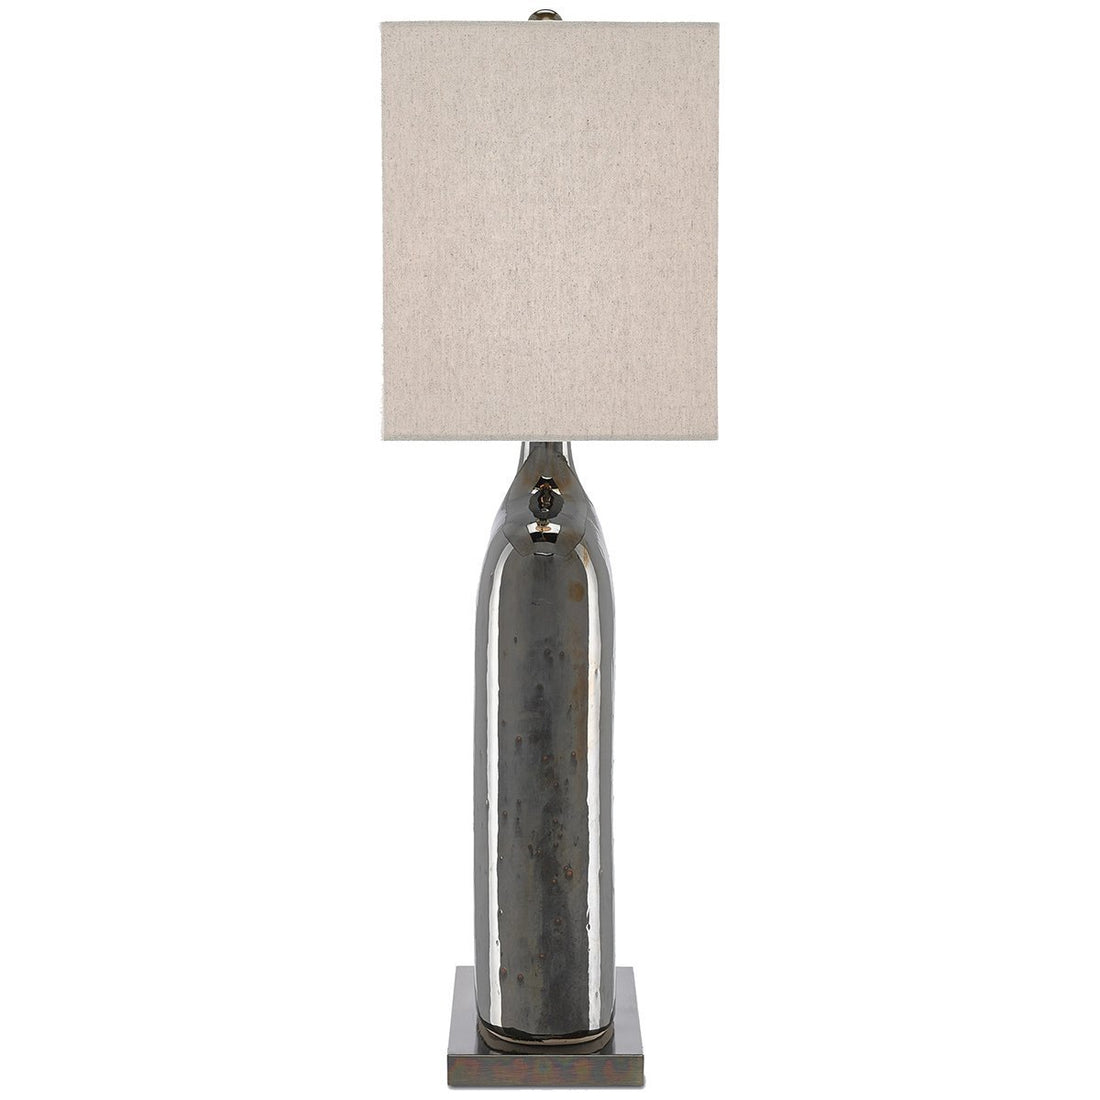 Currey and Company Musing Table Lamp